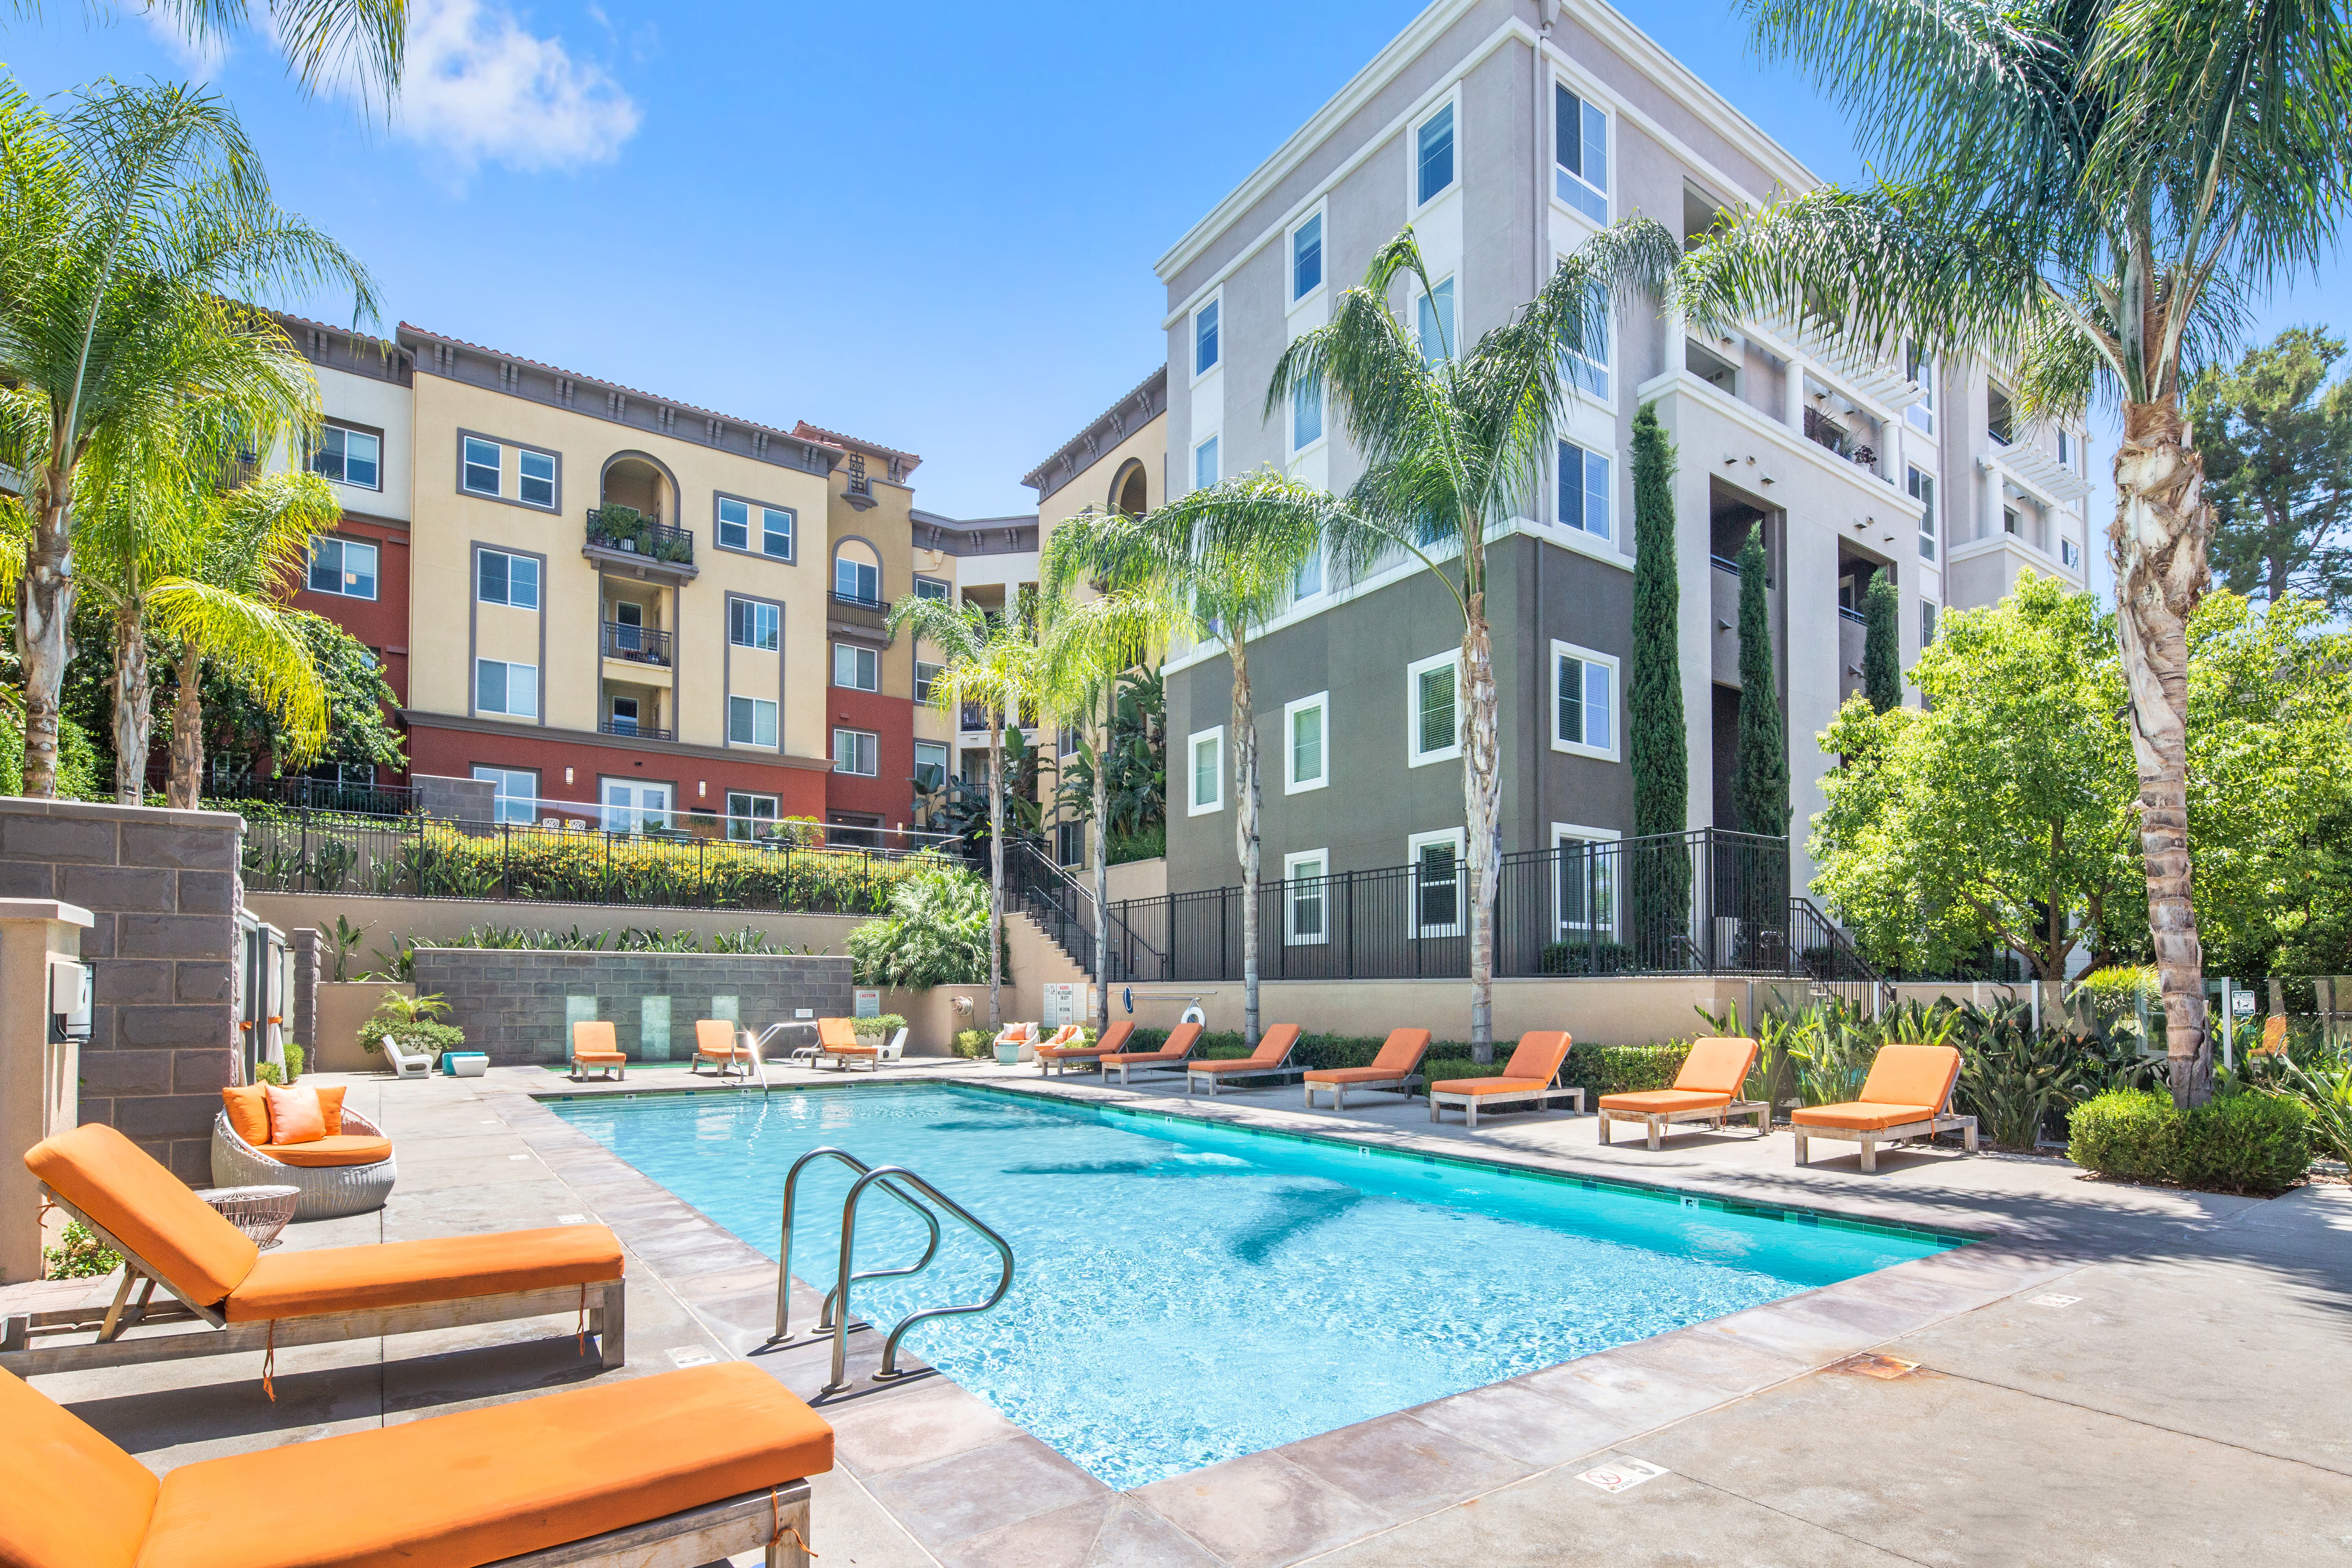 Pool view and beautifully landscaped grounds at The Boulevard Apartment Homes in Woodland Hills, California